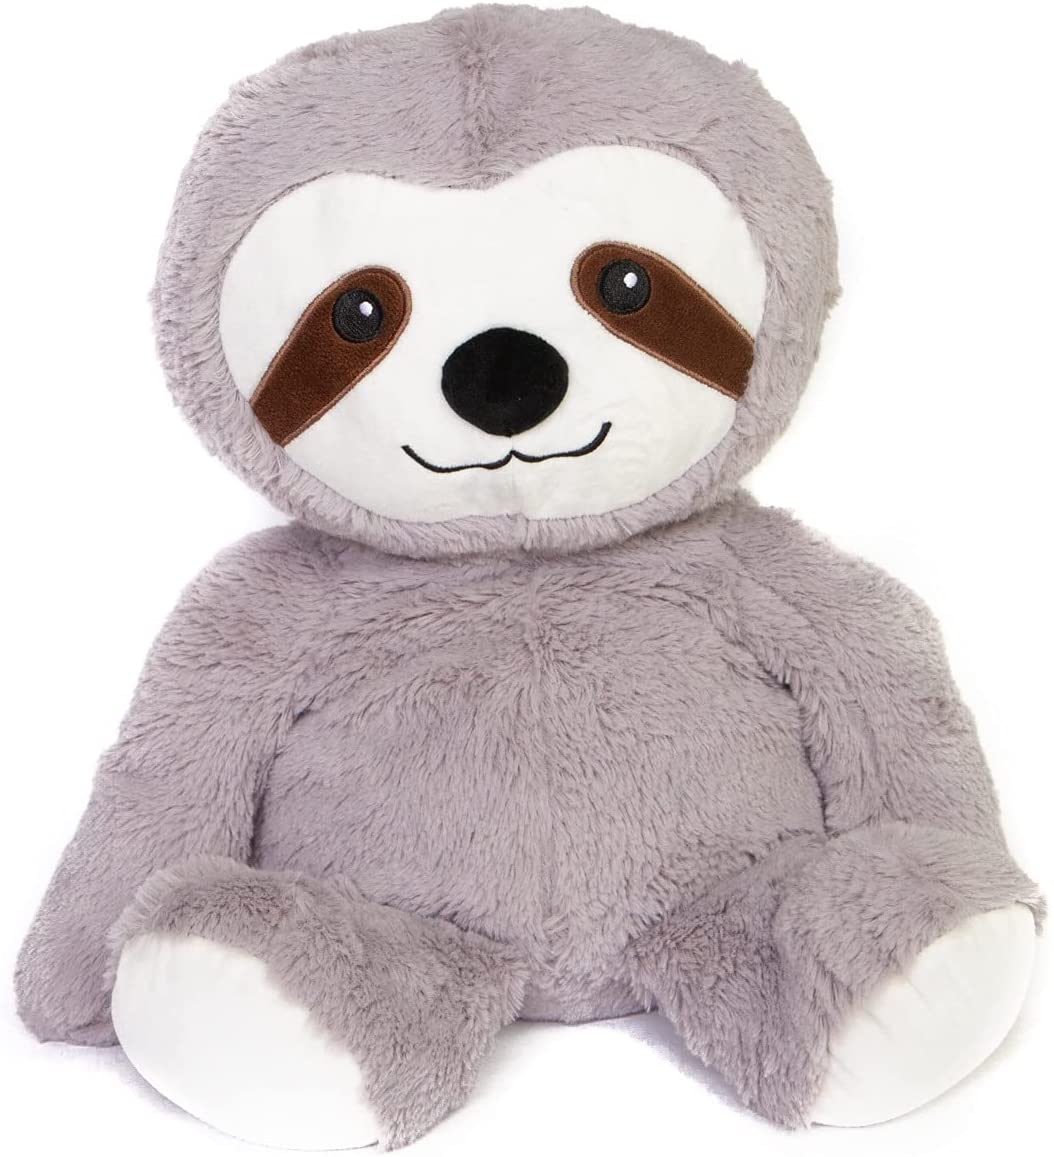 Weighted Plush Animals for Children for Anxiety Focus or Sensory Input Calming Lap Teddy 